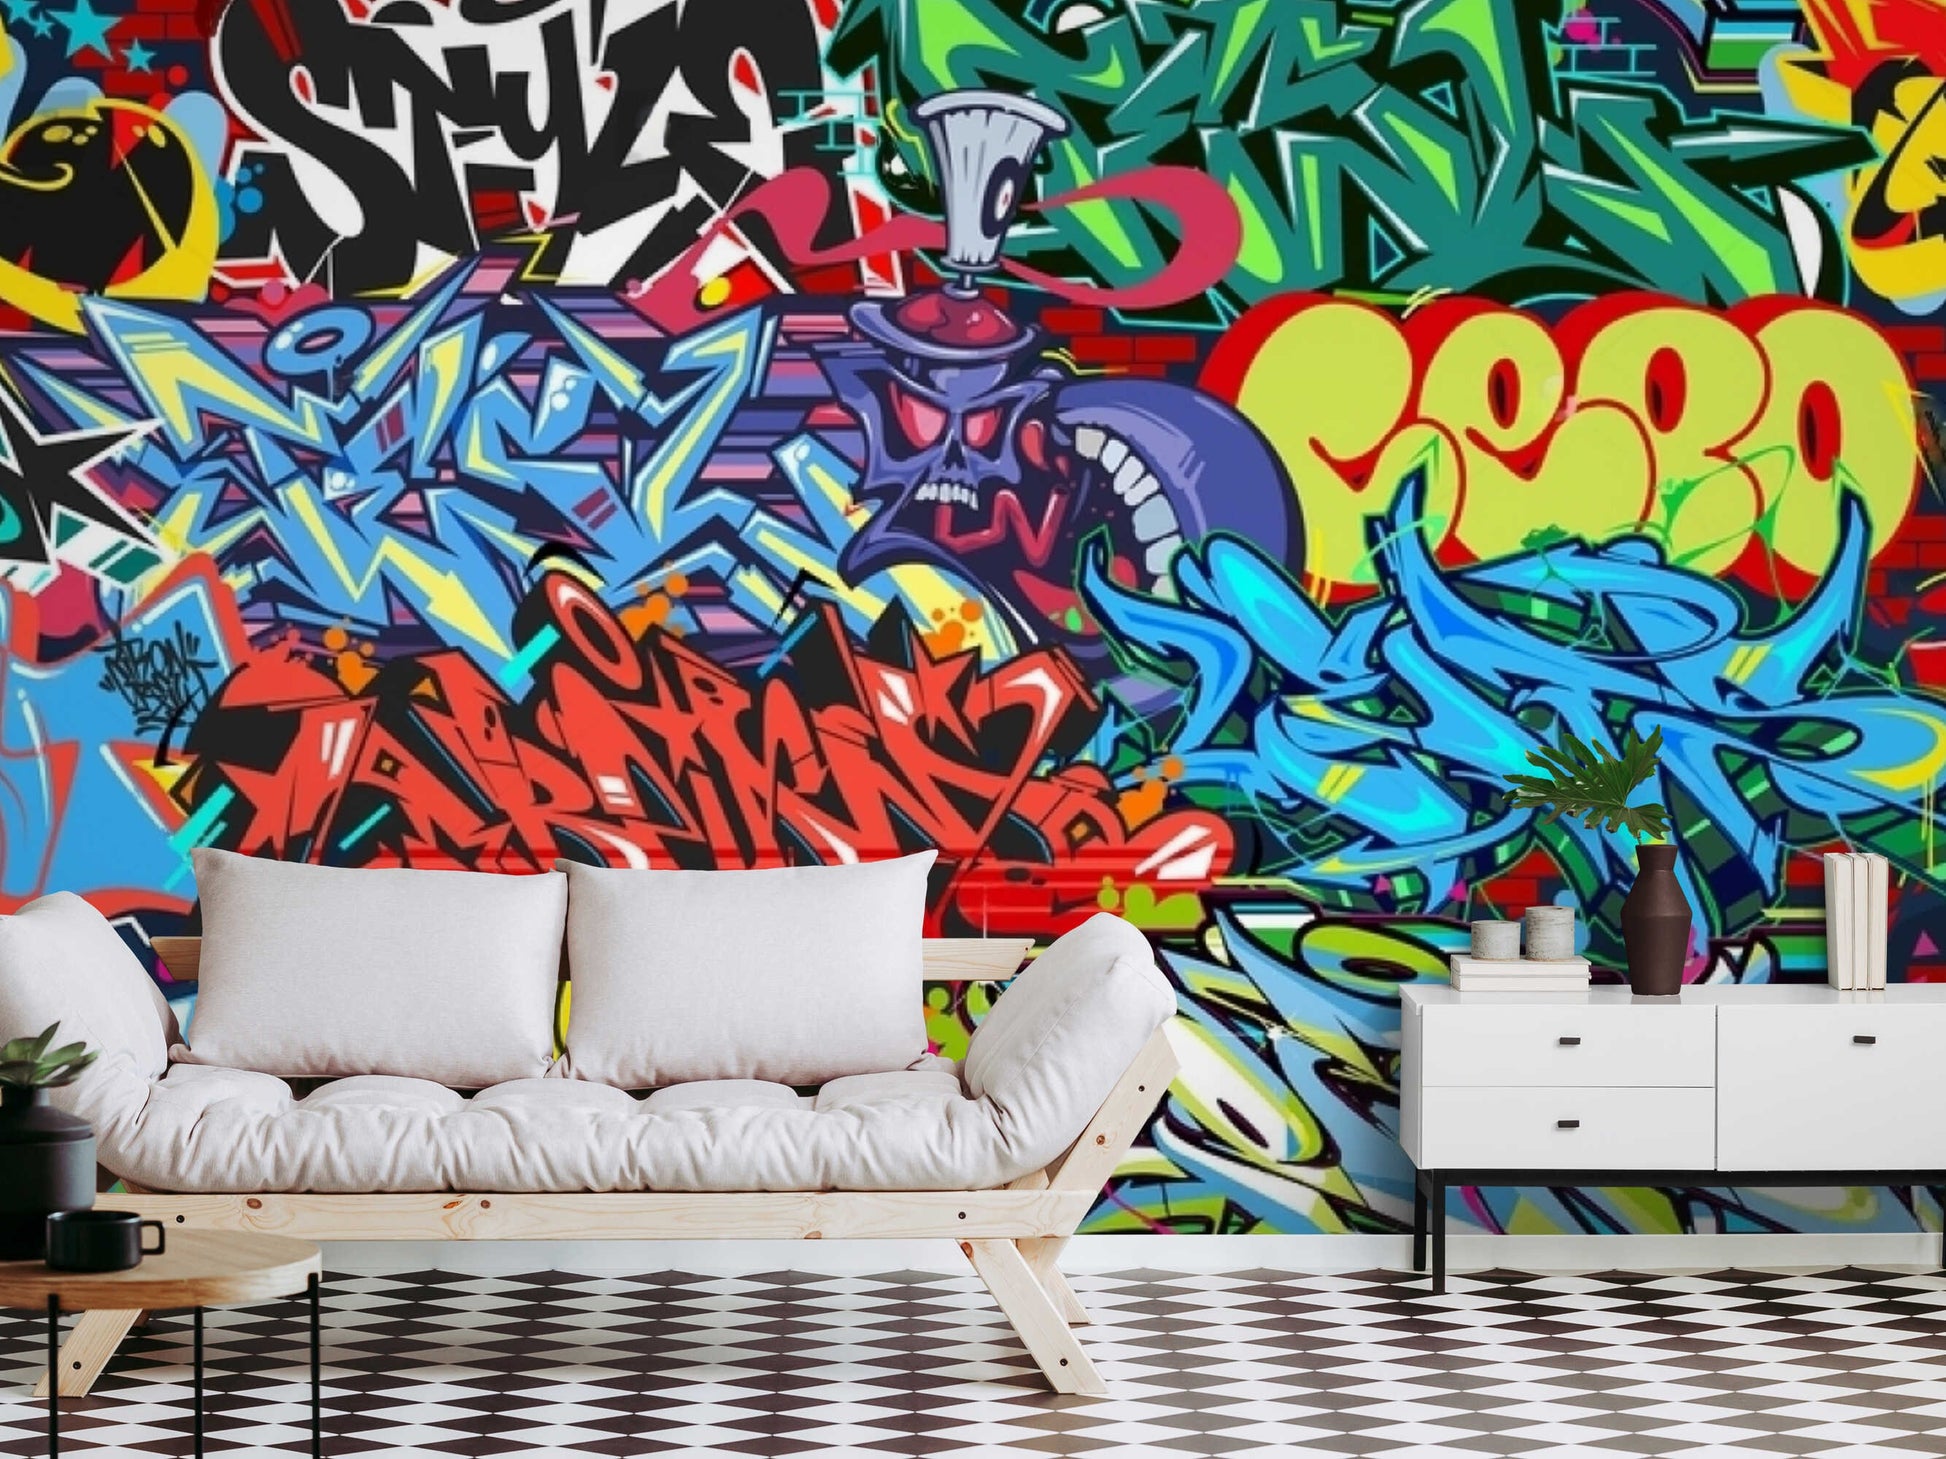 A vibrant and striking wall mural featuring a colorful graffiti design. The mural includes a mix of bright colors and abstract shapes, with a street art-inspired style."  Remember to be descriptive and relevant, and to include keywords that accurately describe the image.